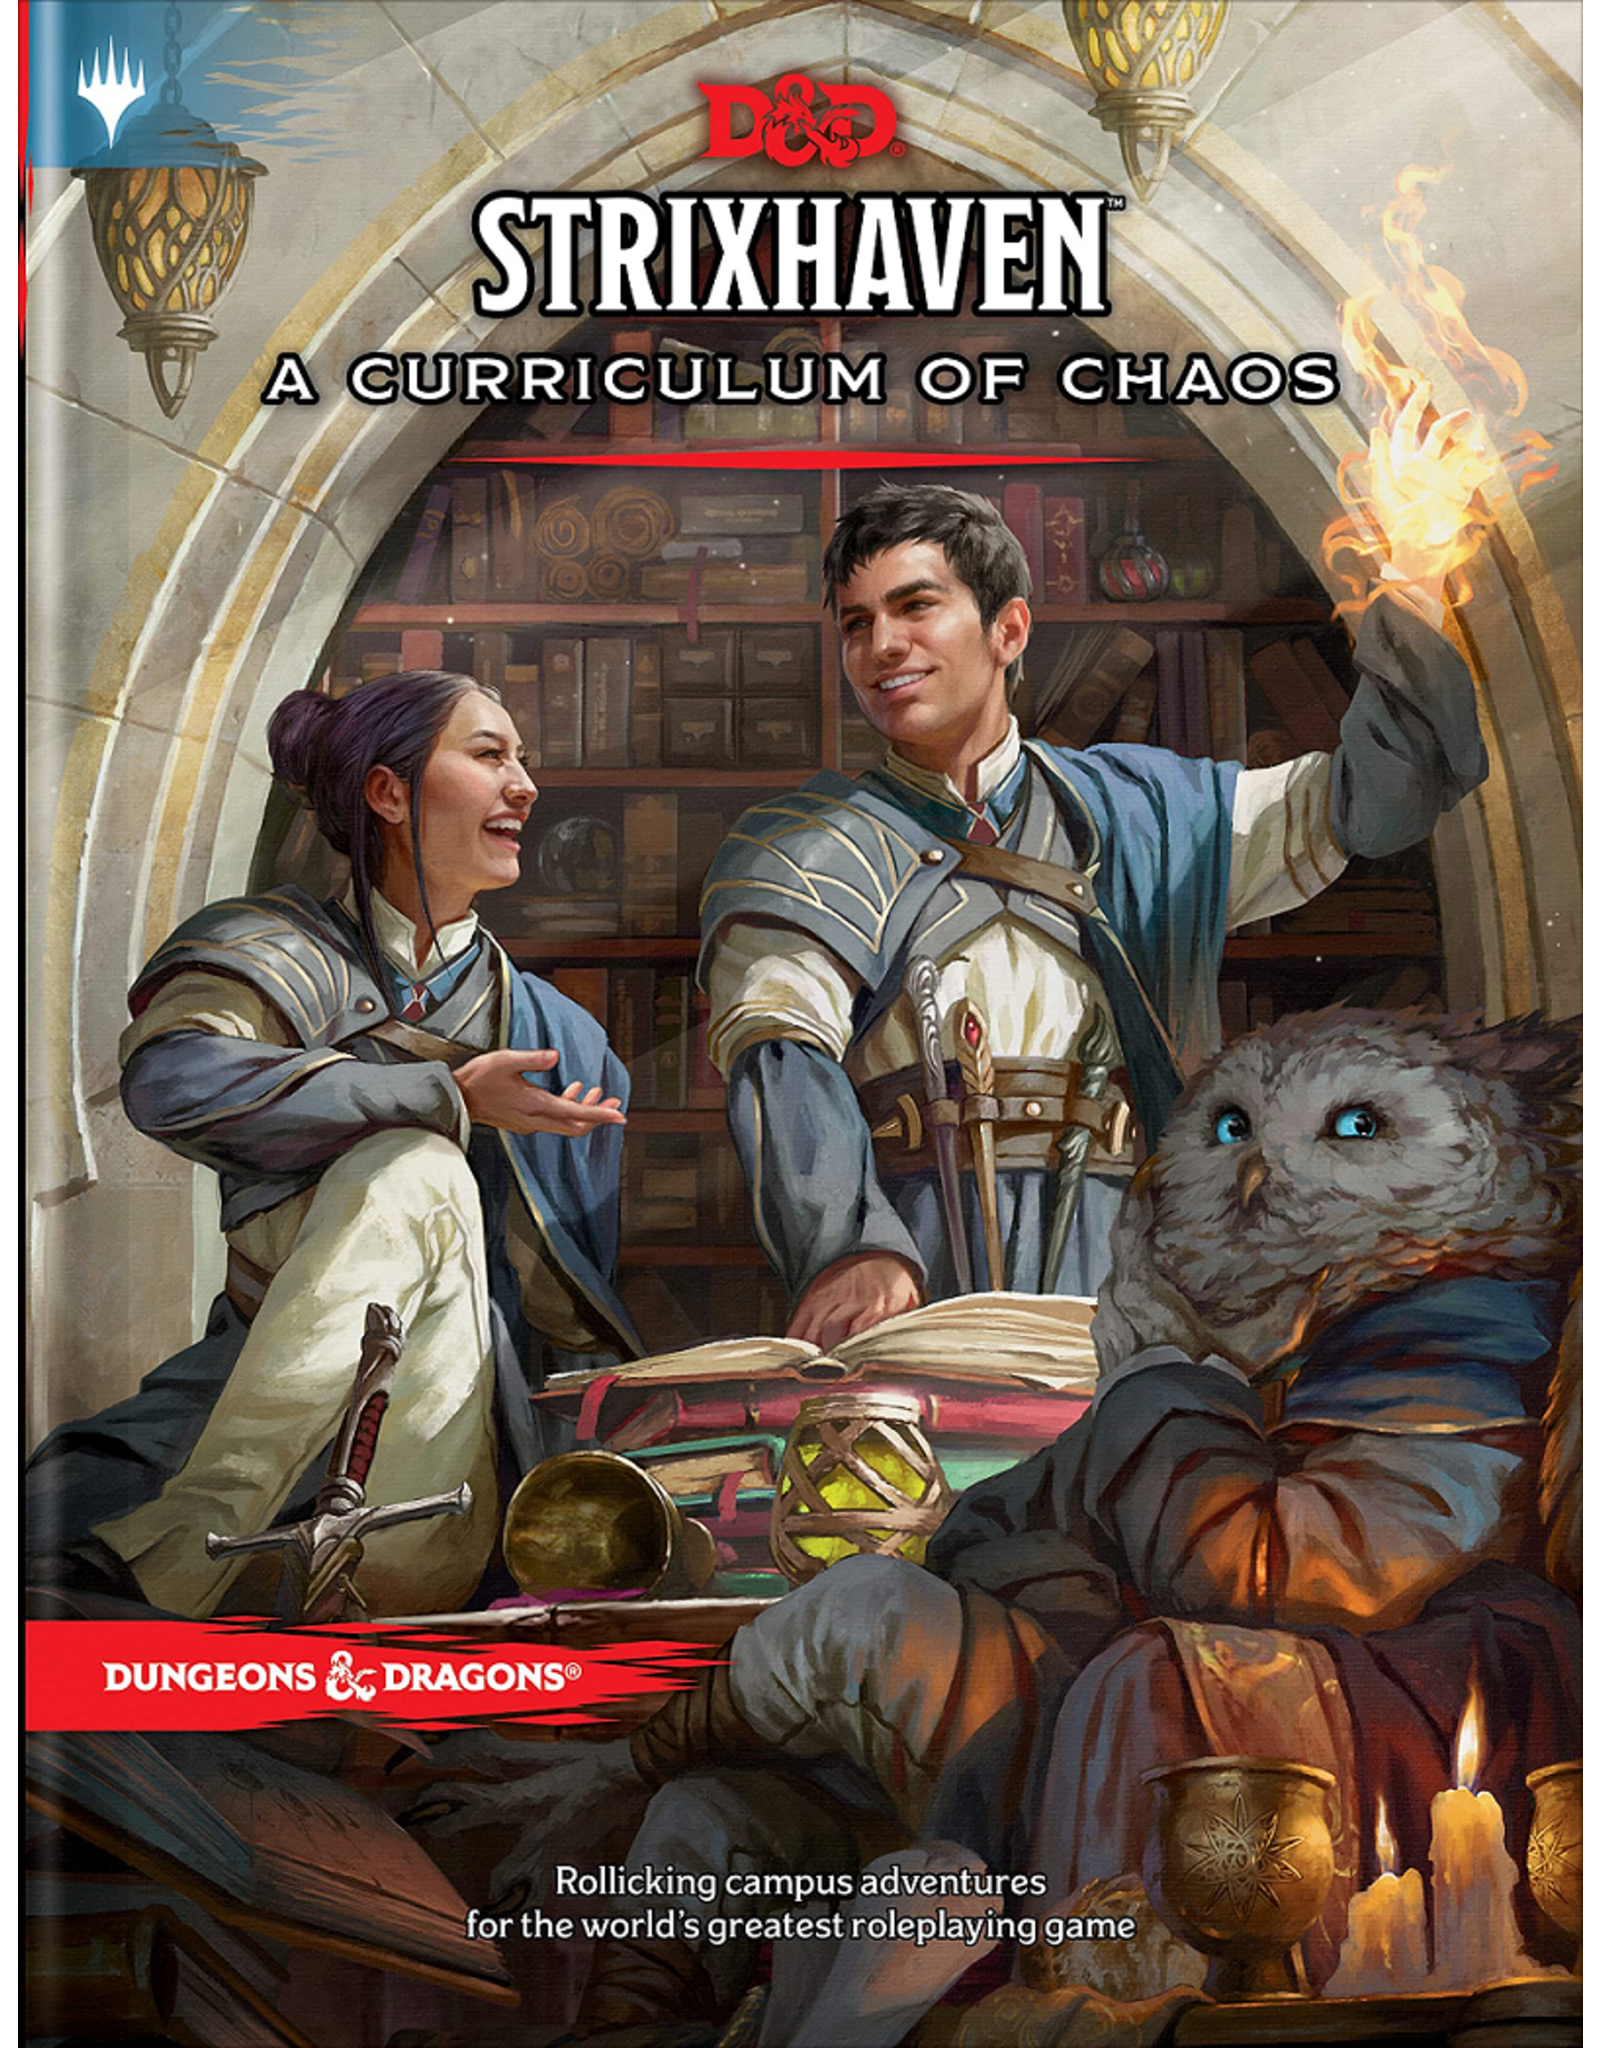 Wizards of the Coast Strixhaven Curriculum of Chaos: Regular Cover